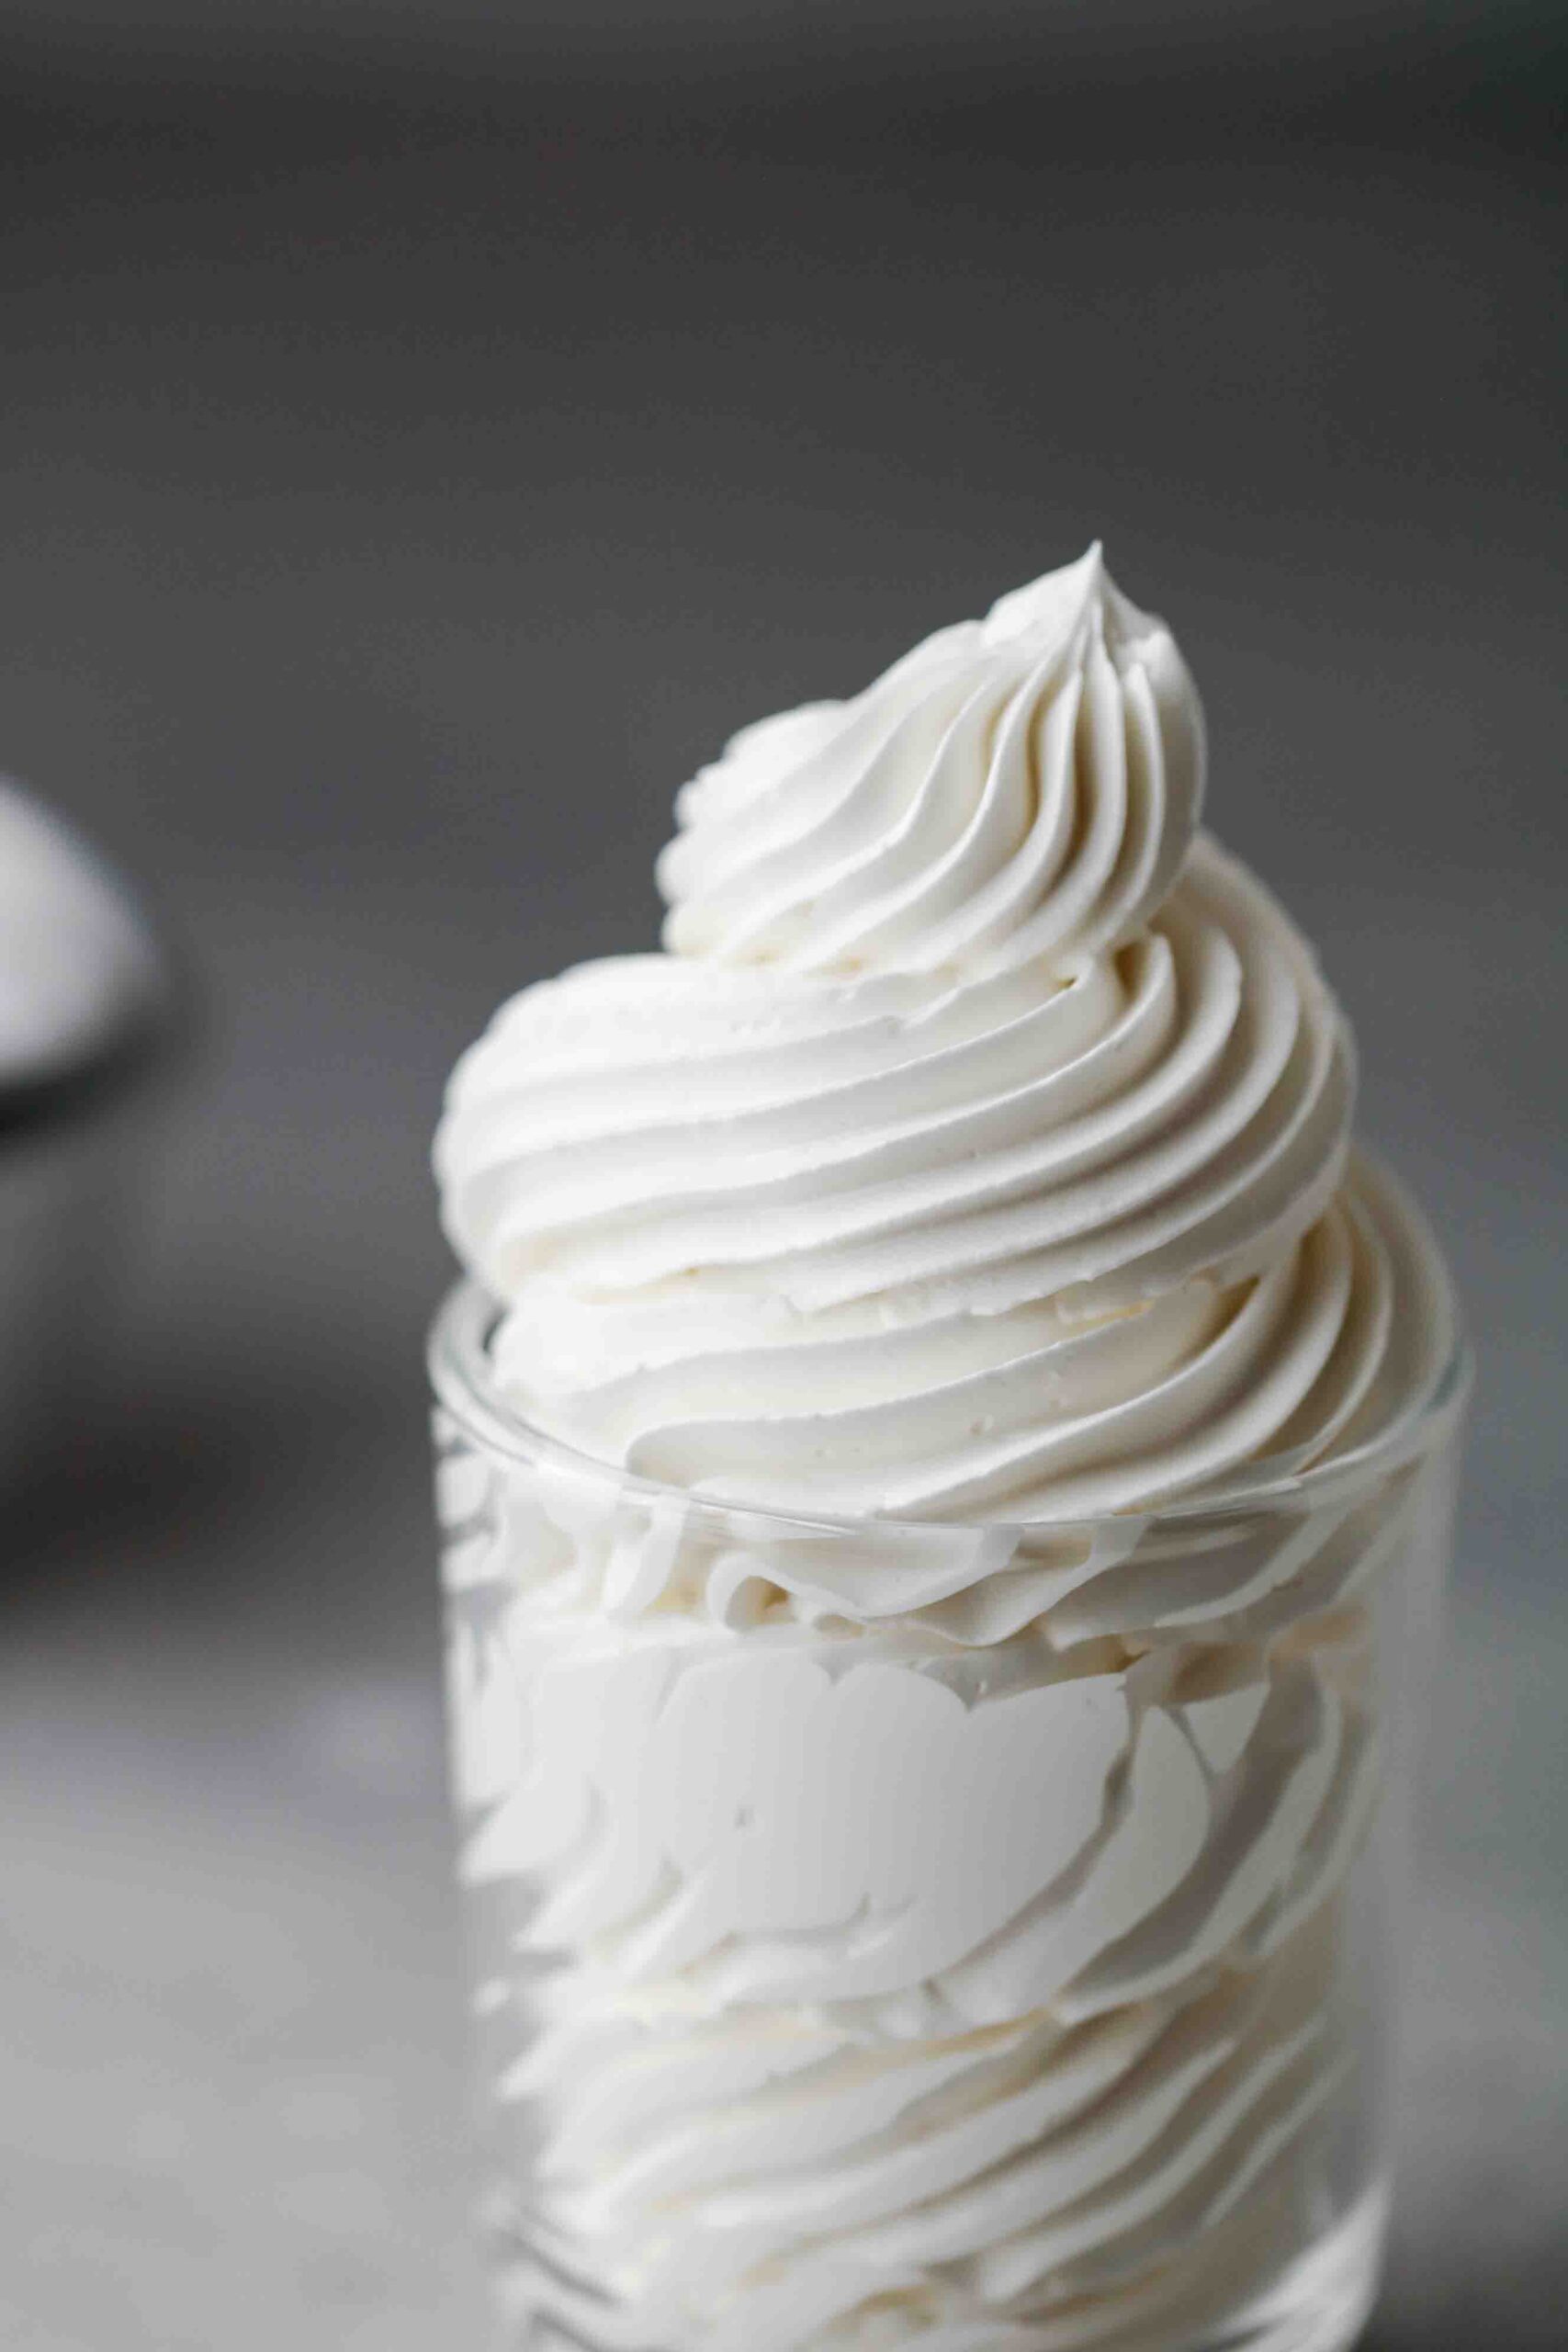 Swiss meringue buttercream piped in a cup